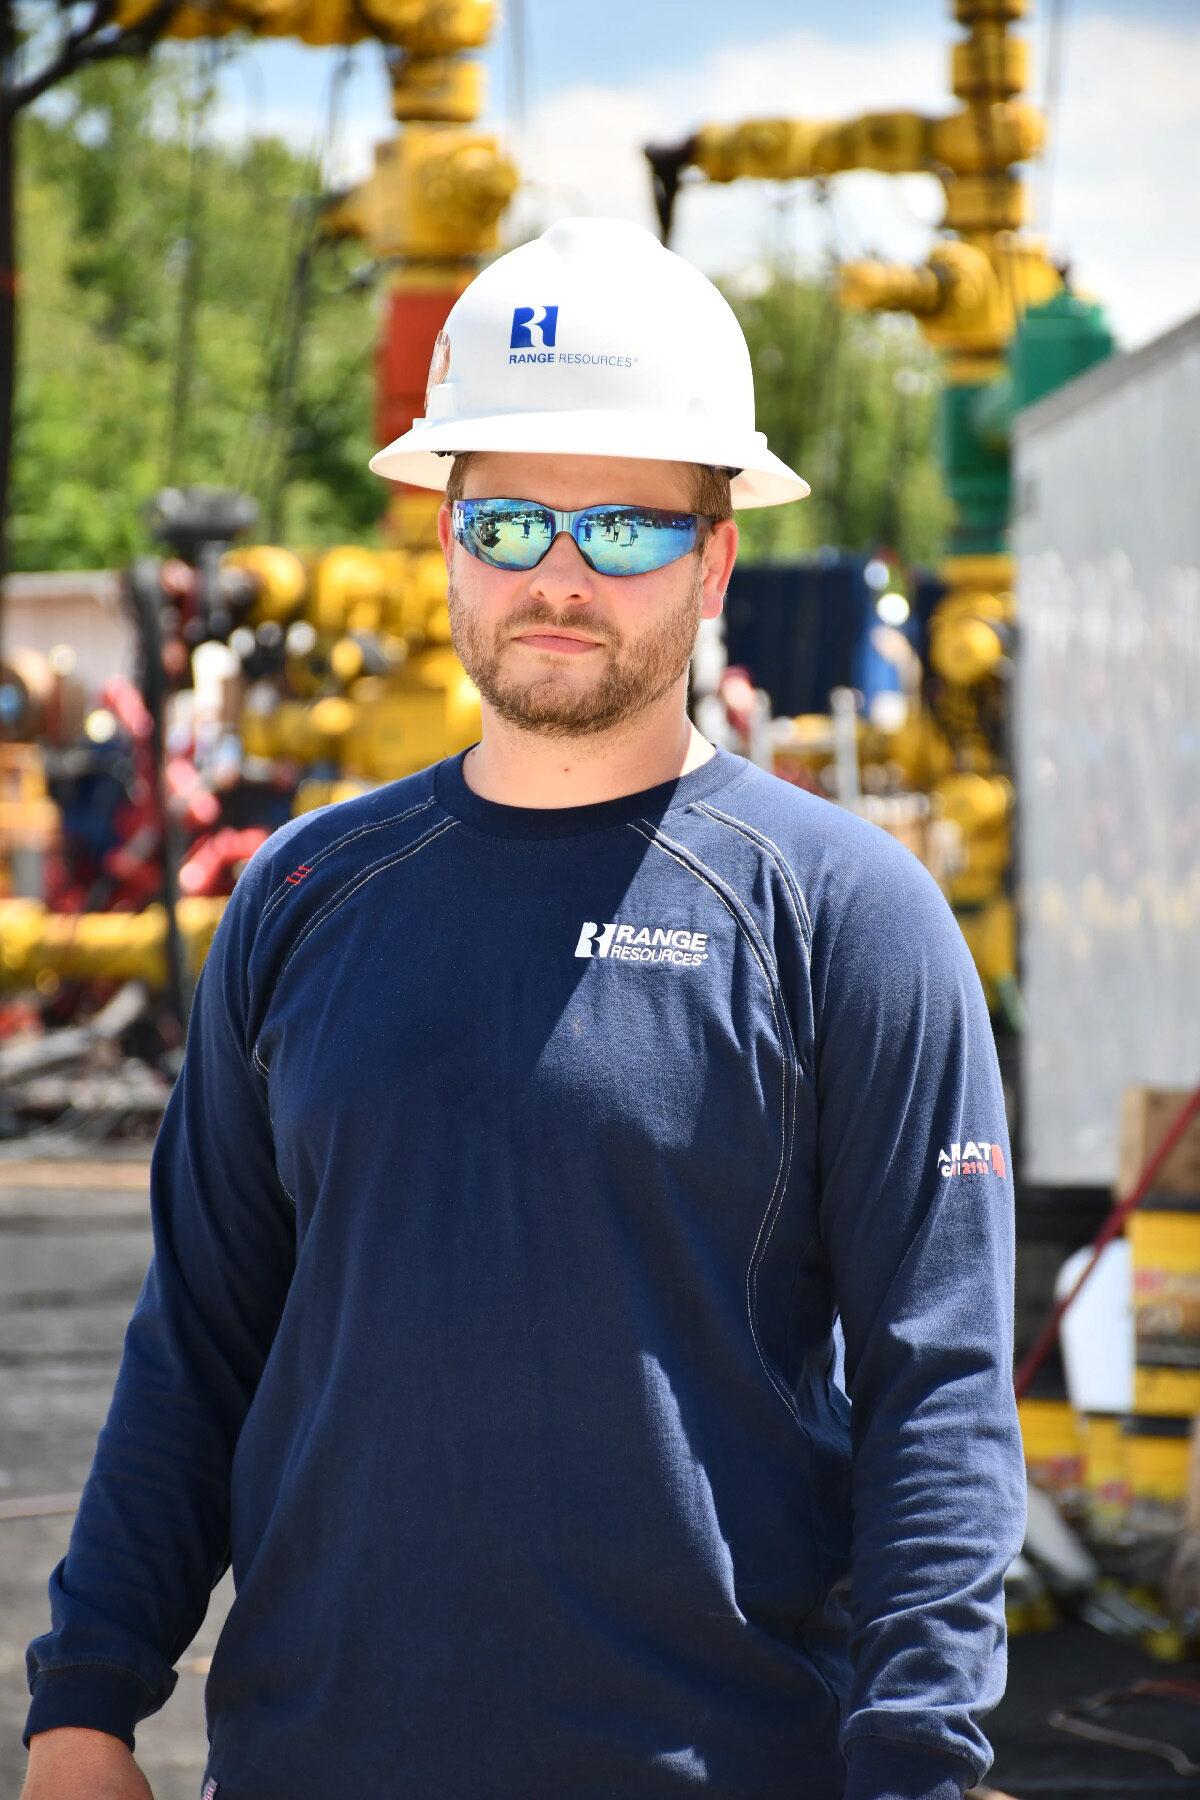 Derek Yanchak is a completions manager at Range Resources. (Shannon Venditti)